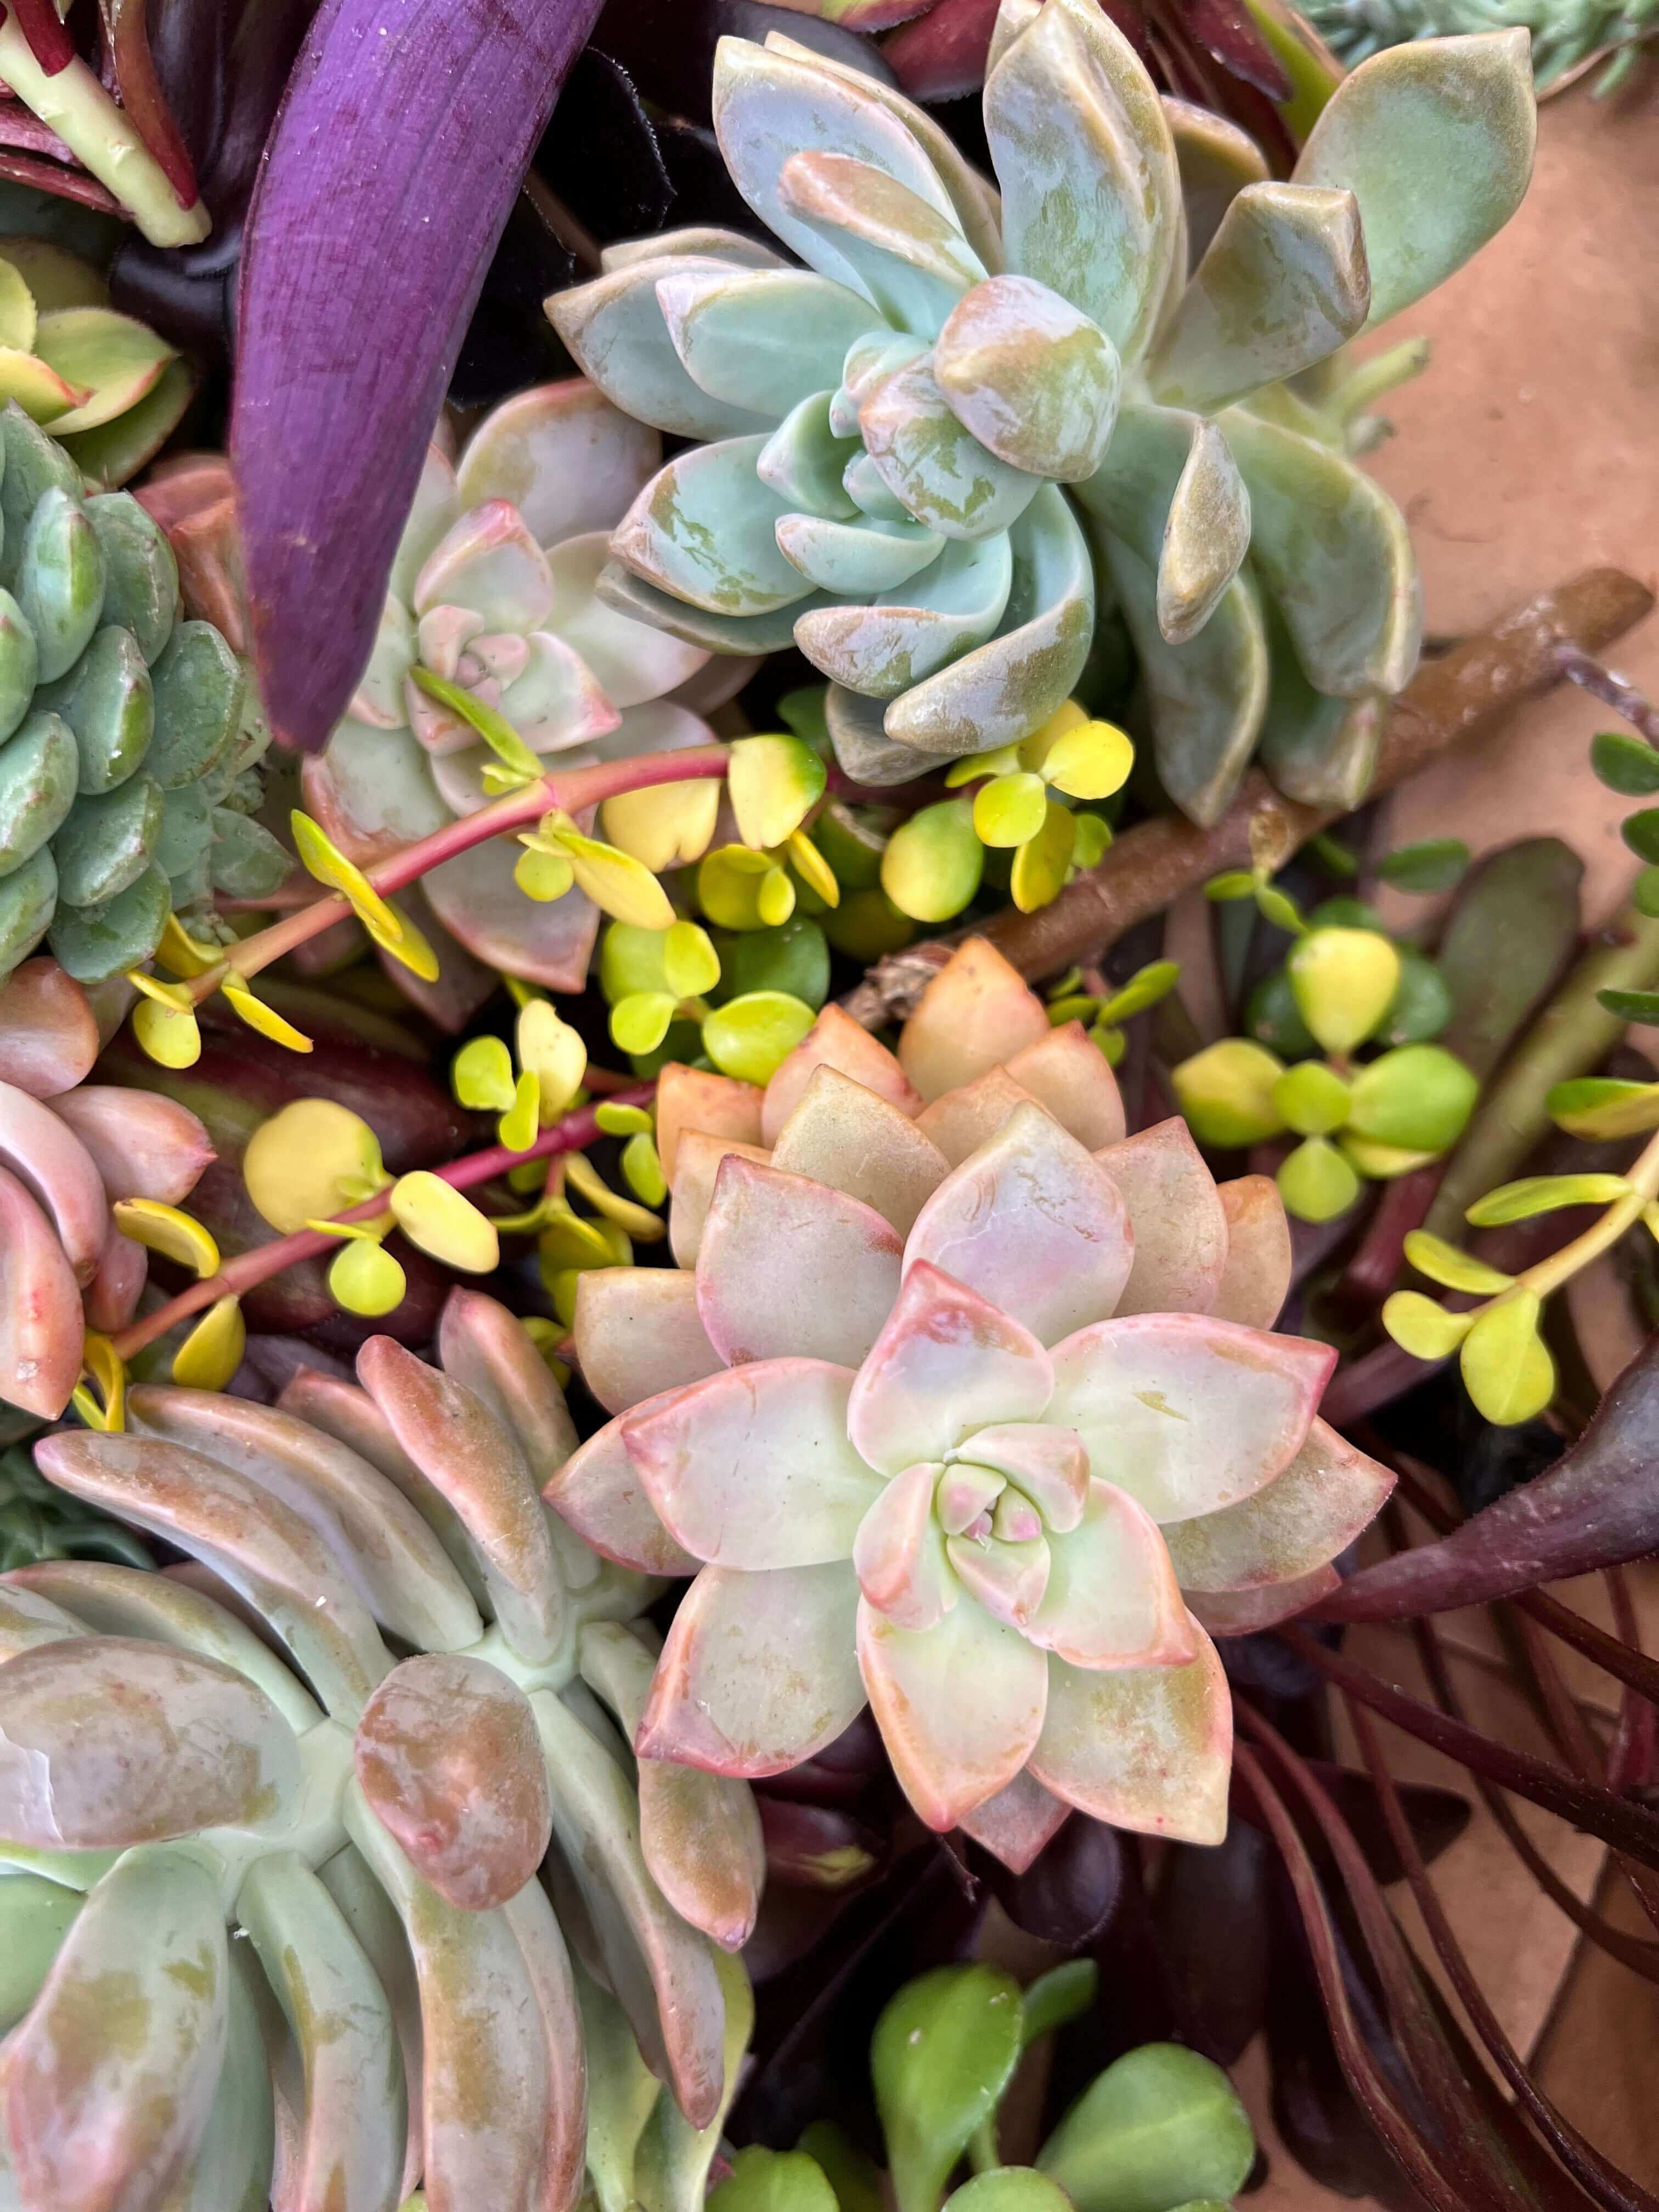 Assorted succulent cuttings from Southern California, highlighted by their varied colors and forms in a close-up shot.